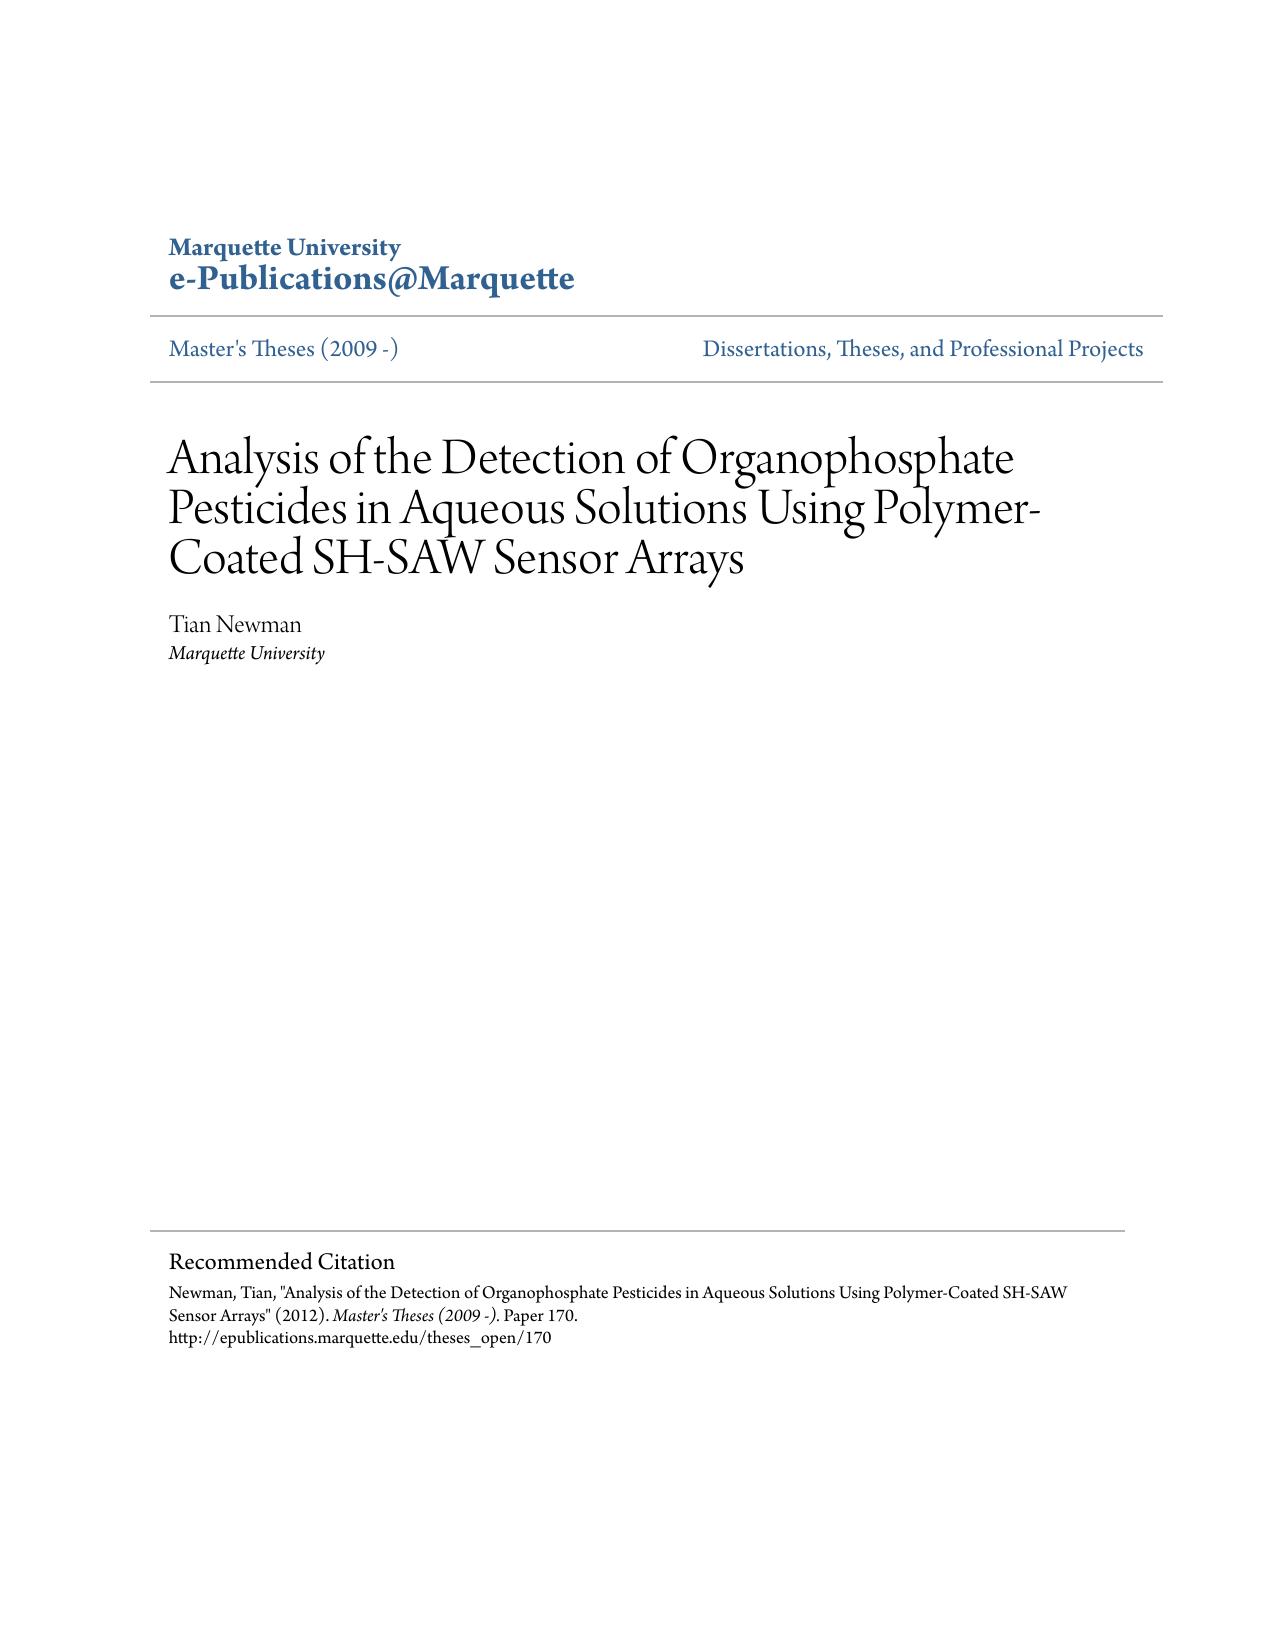 Analysis of the Detection of Organophosphate Pesticides in Aqueous Solutions Using Polymer-Coated SH-SAW Sensor Arrays